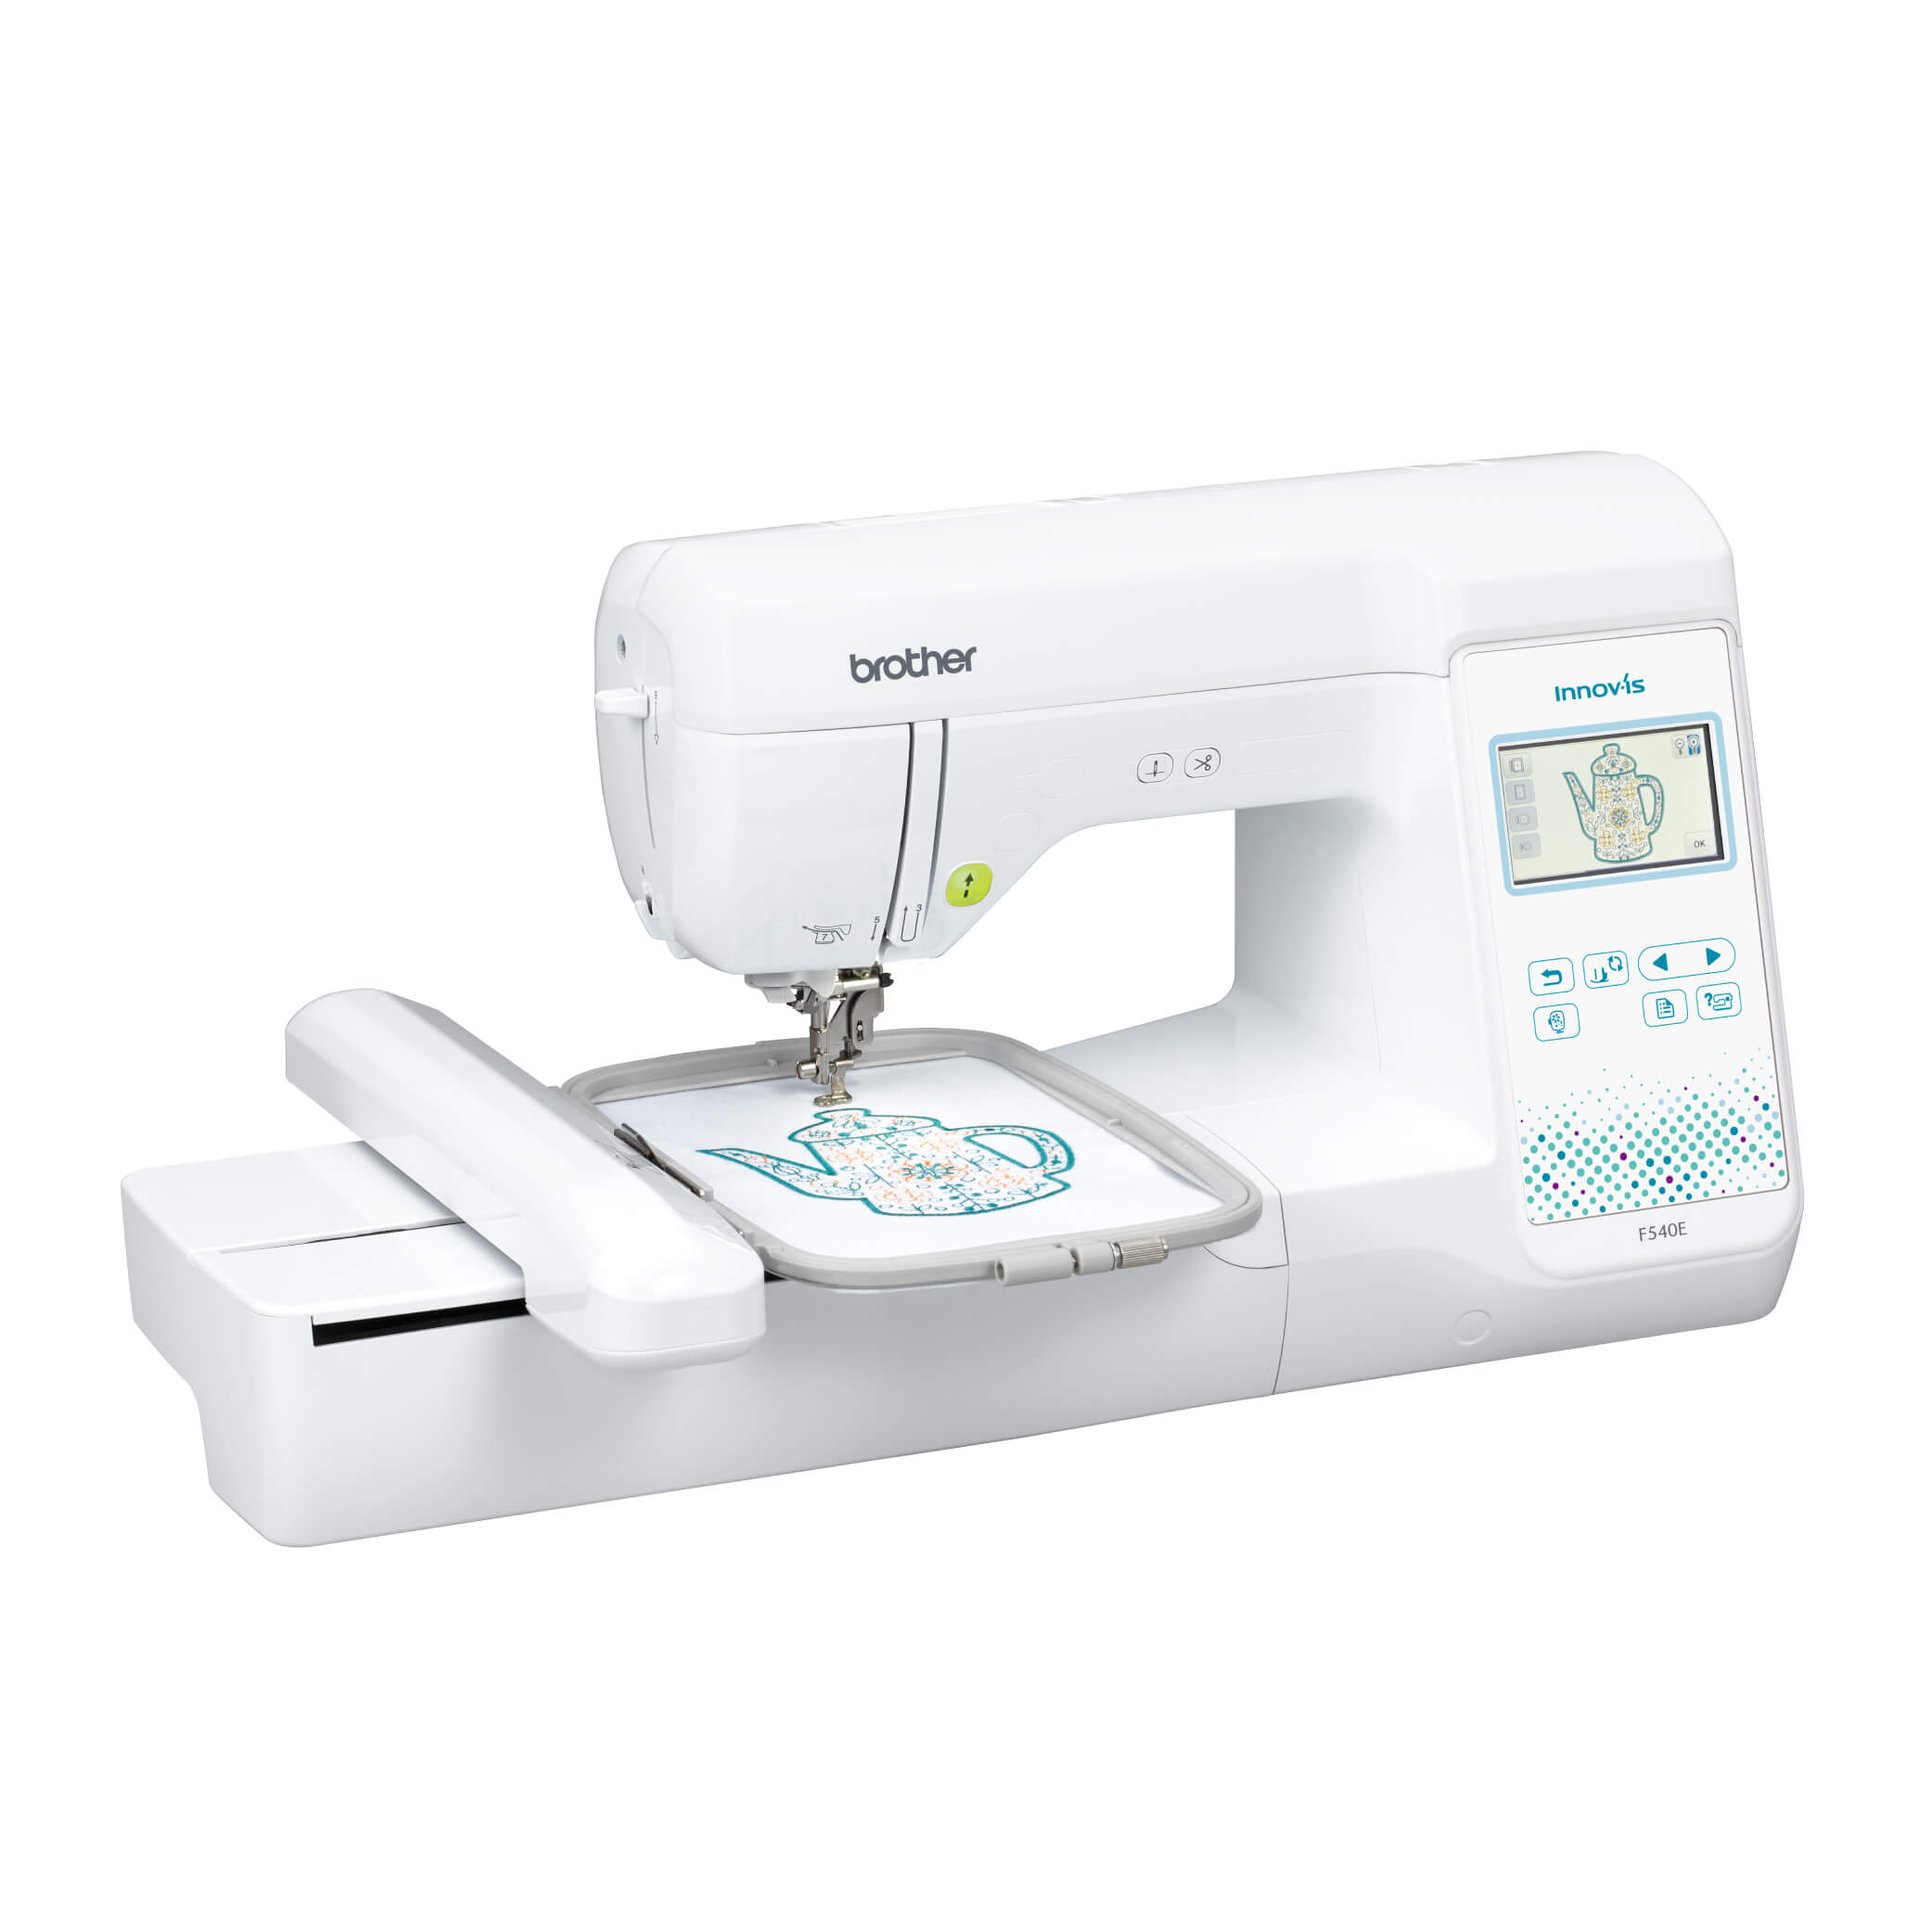 sew and grow, The Innov – is F540 has easy to use embroidery features with 130 x 180 mm hoop and Wi-fi connectivity